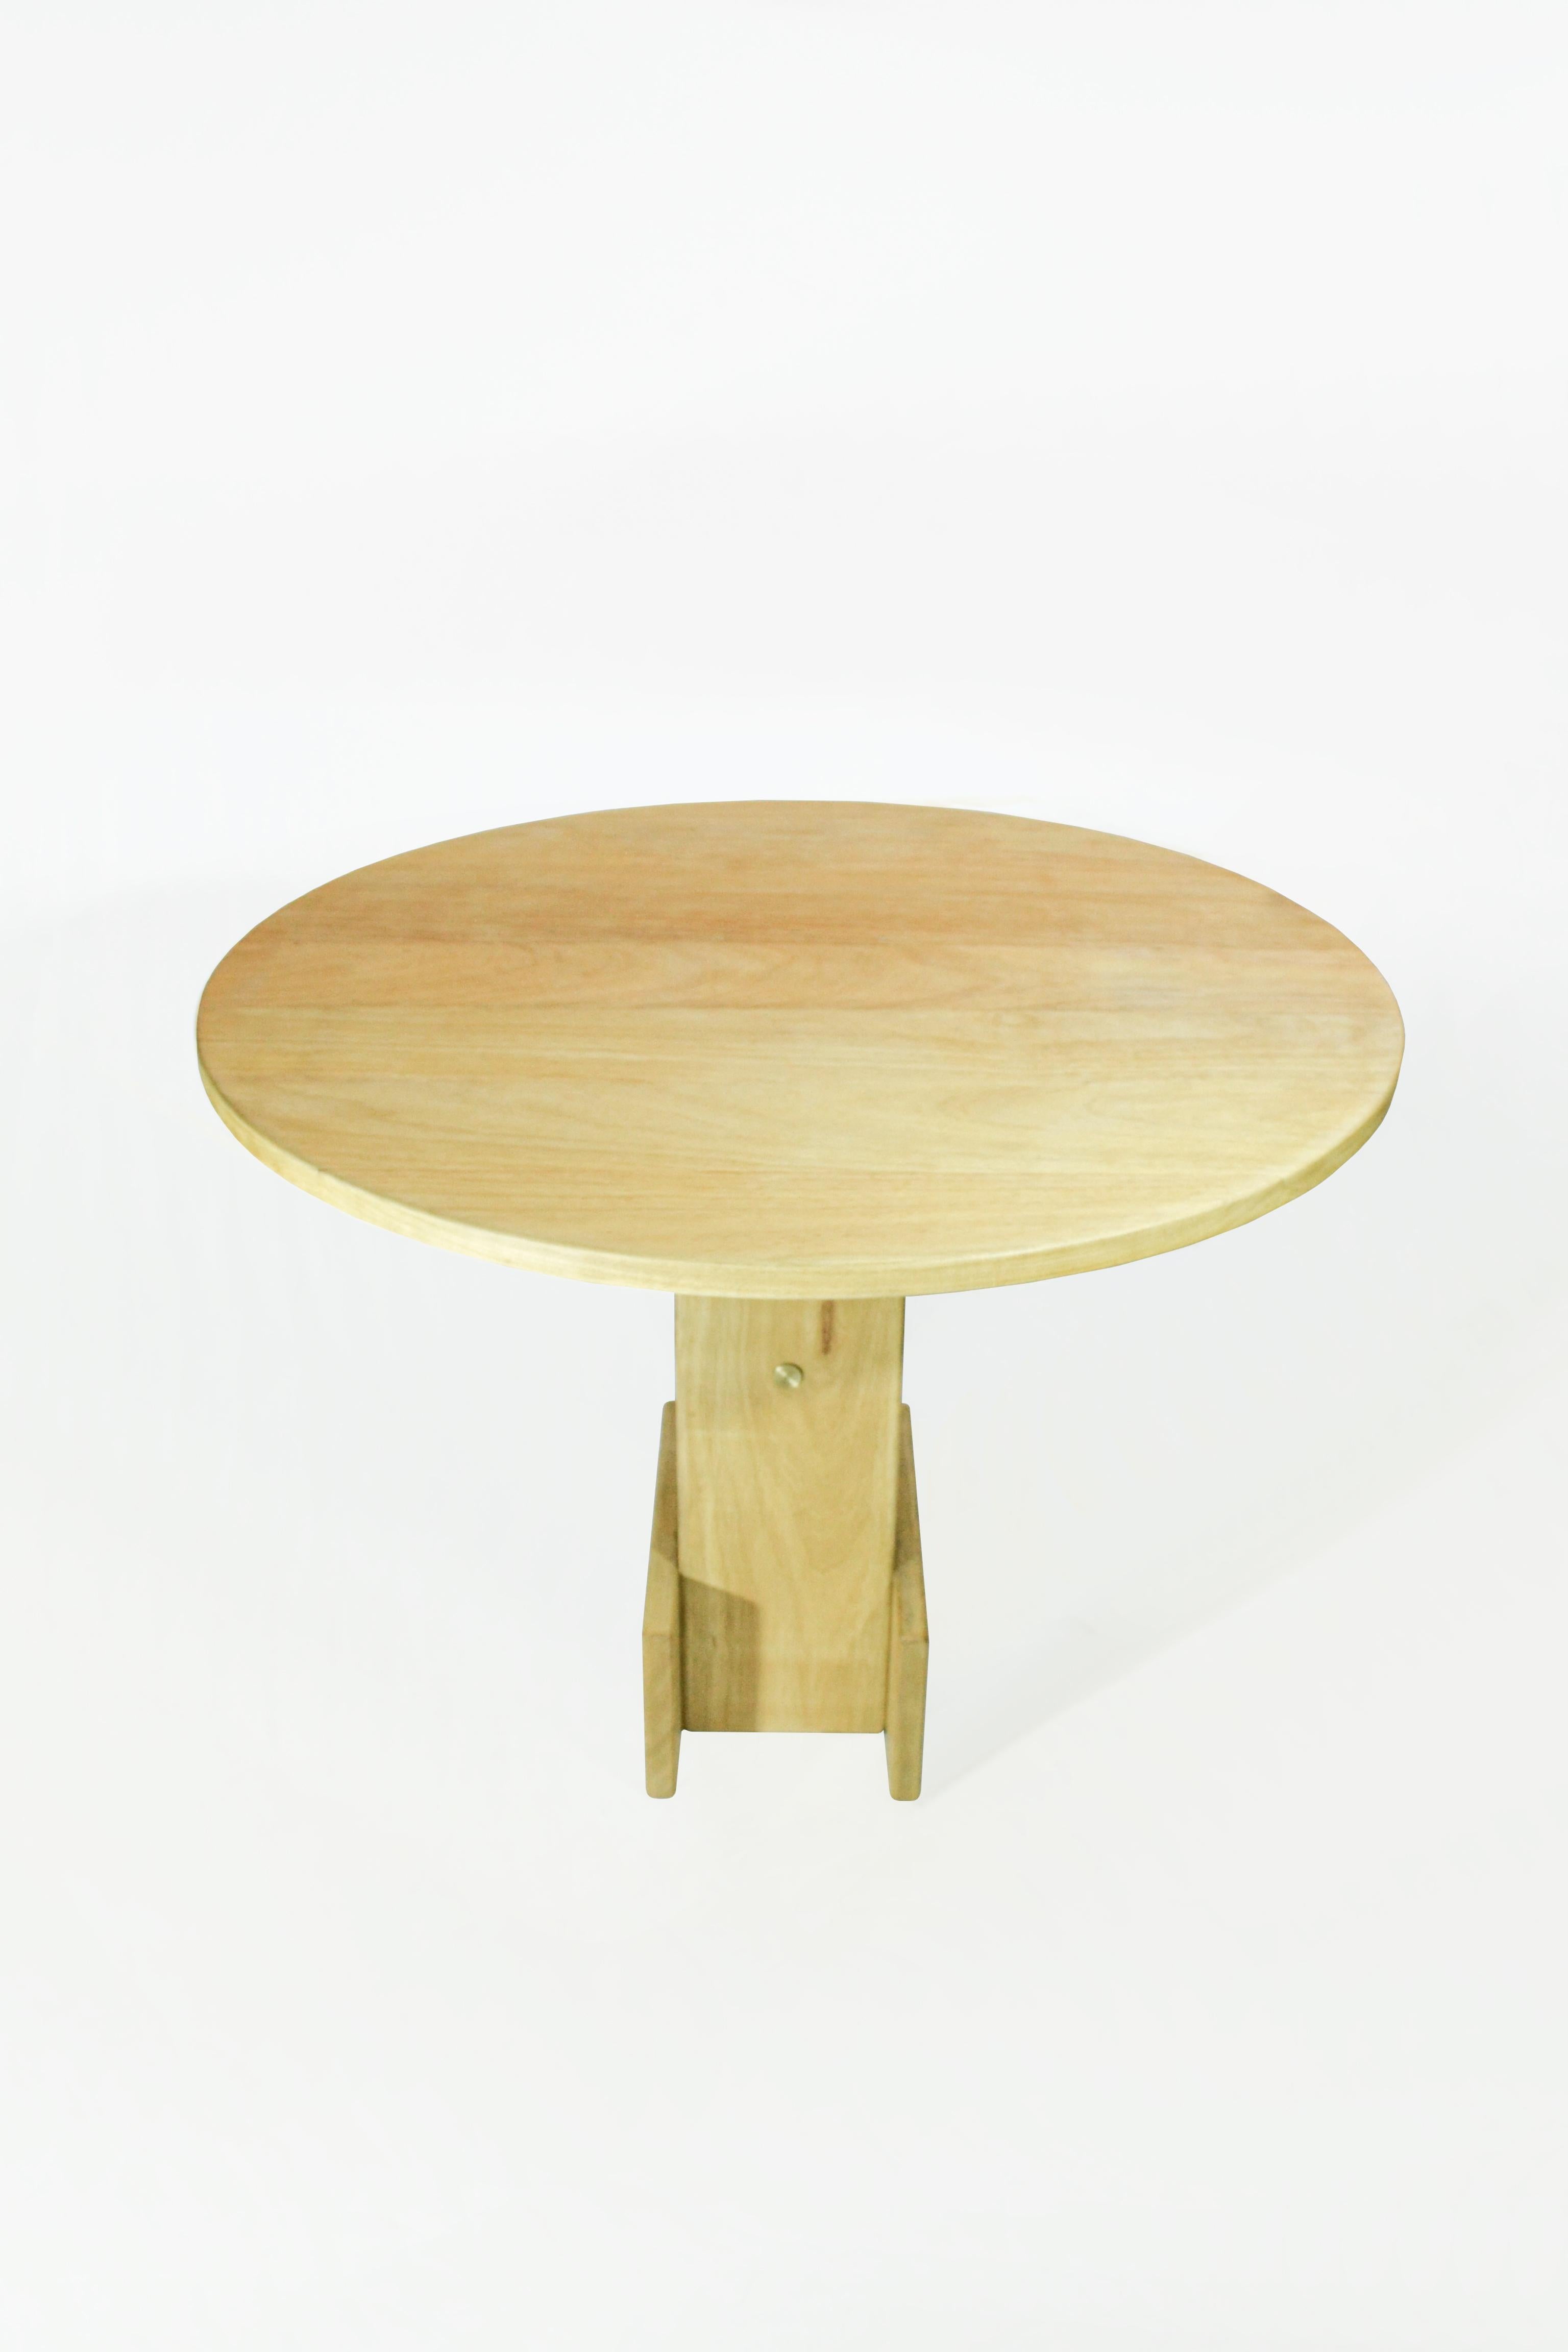 Minimalist North Table by Dimitrih Correa For Sale